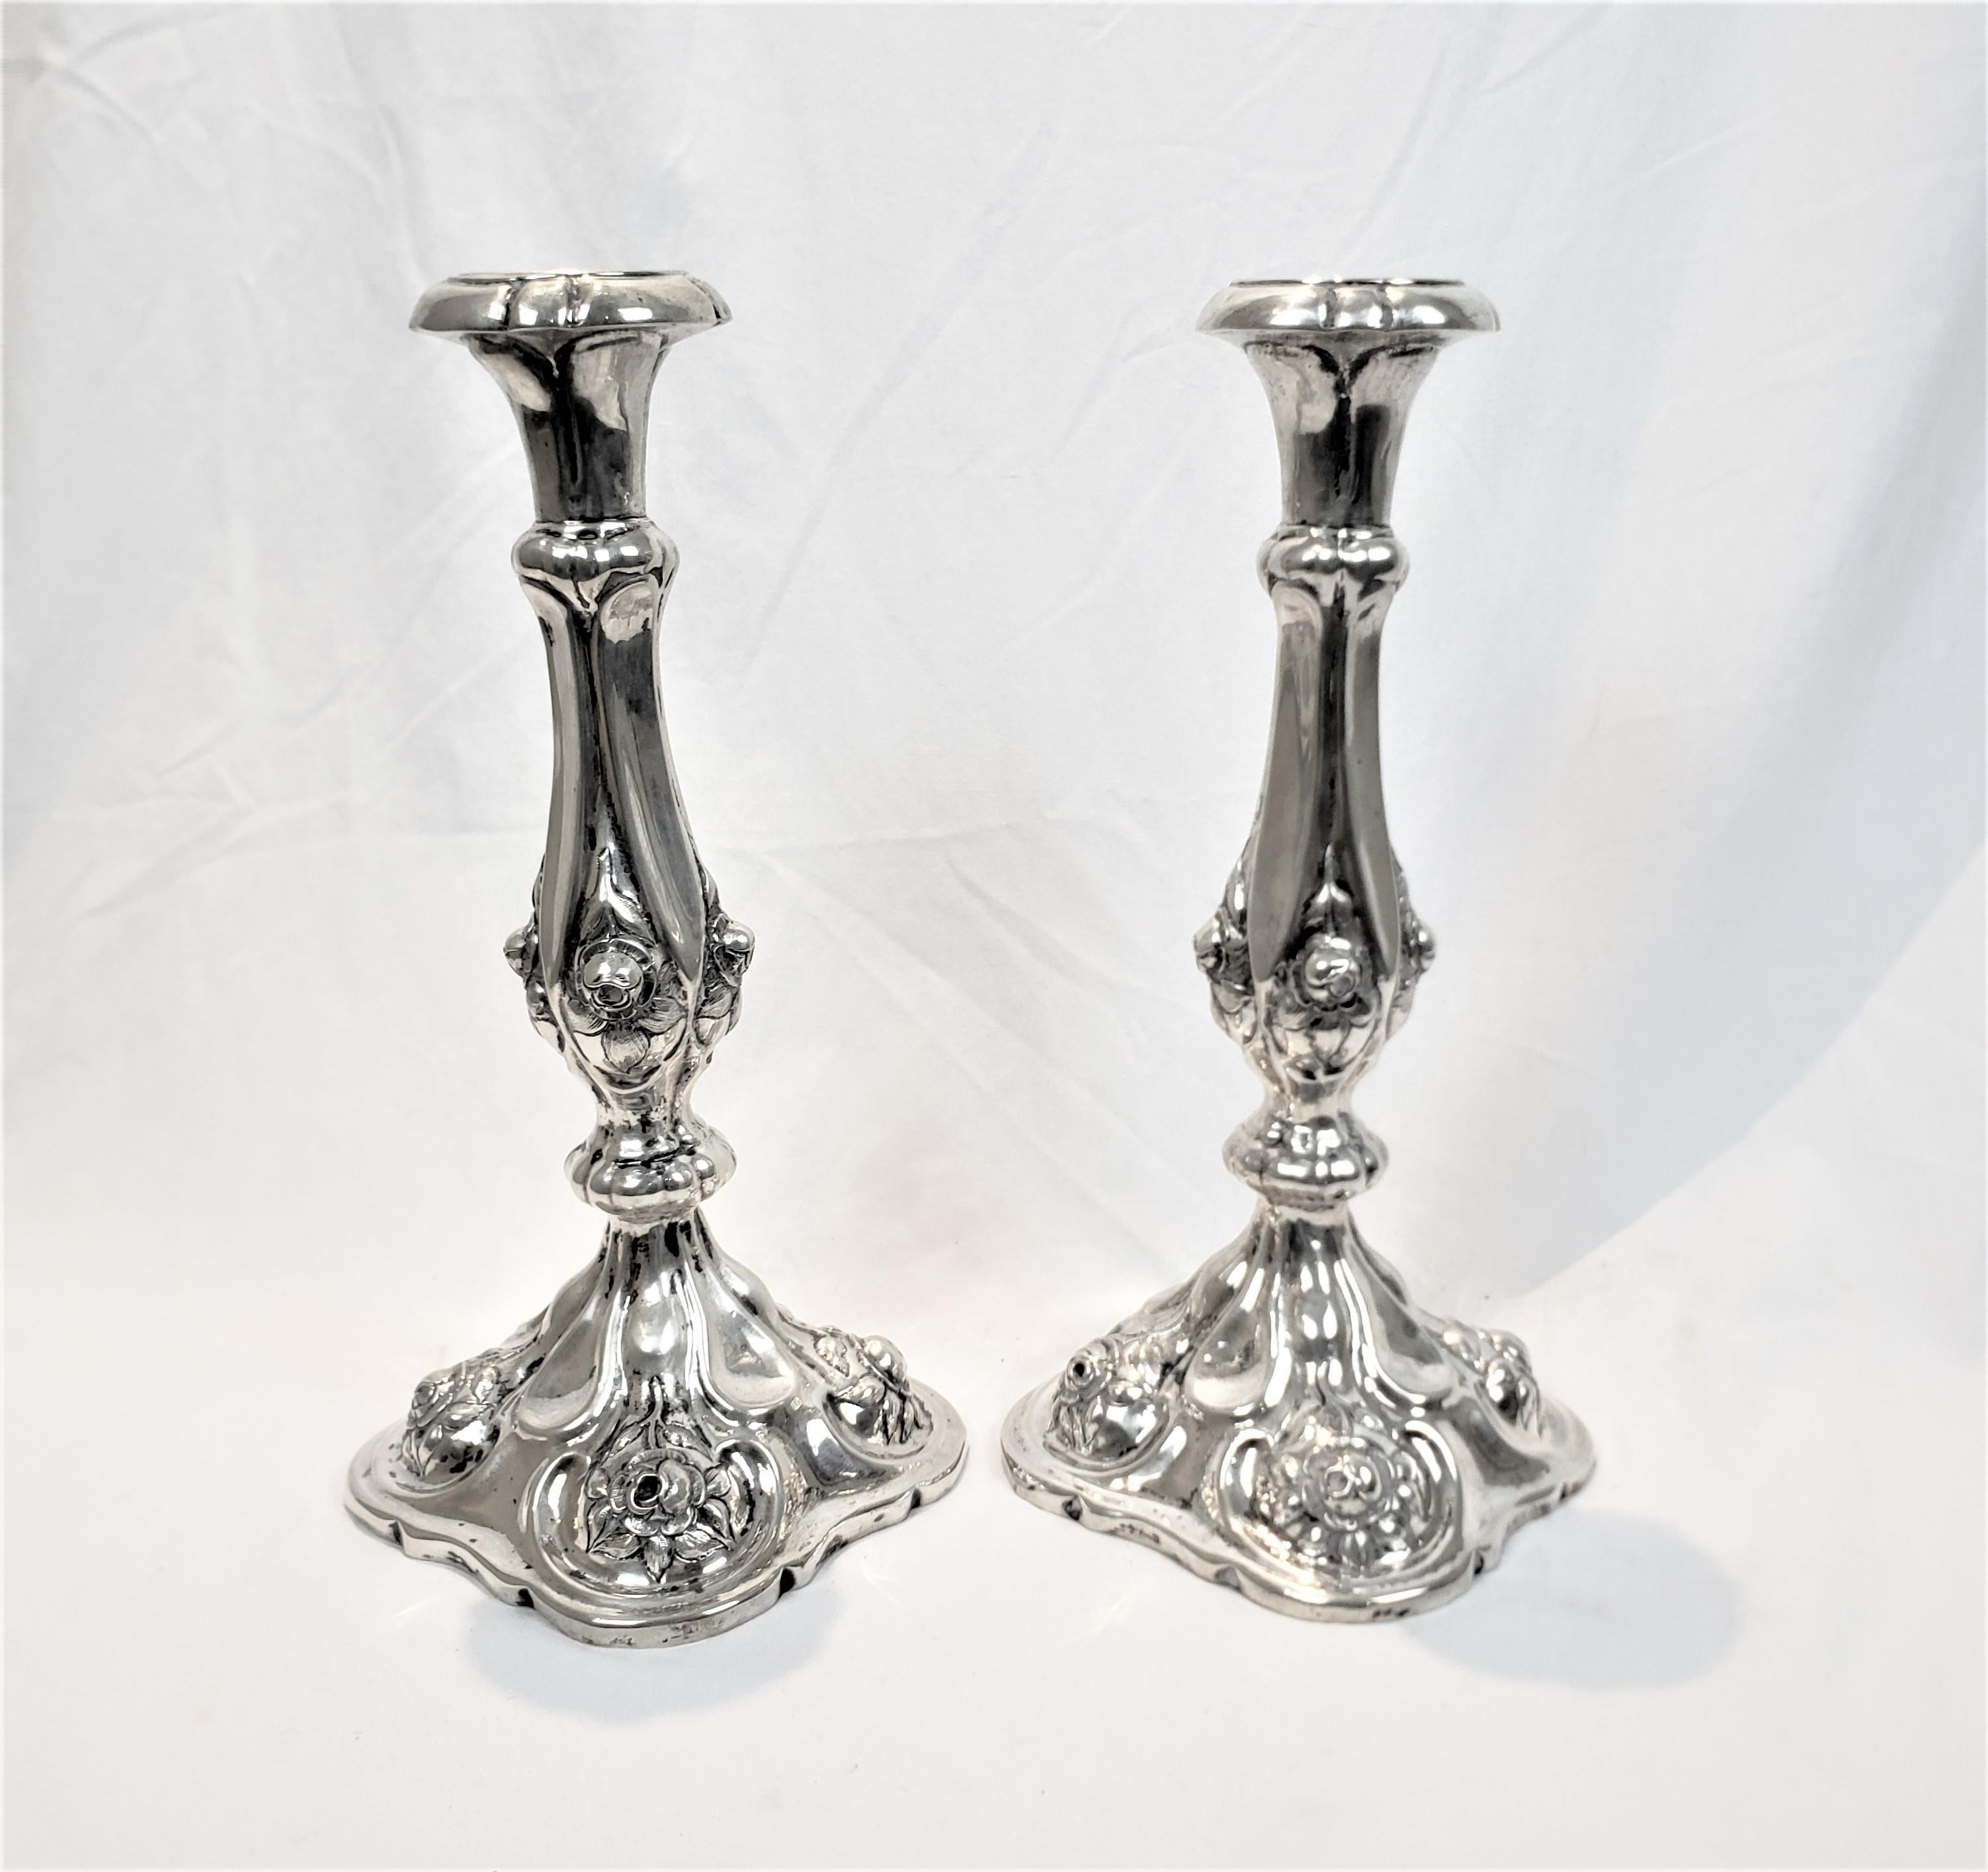 Hand-Crafted Pair of Antique Austro-Hungarian Silver Candlesticks with Chased Flowers For Sale